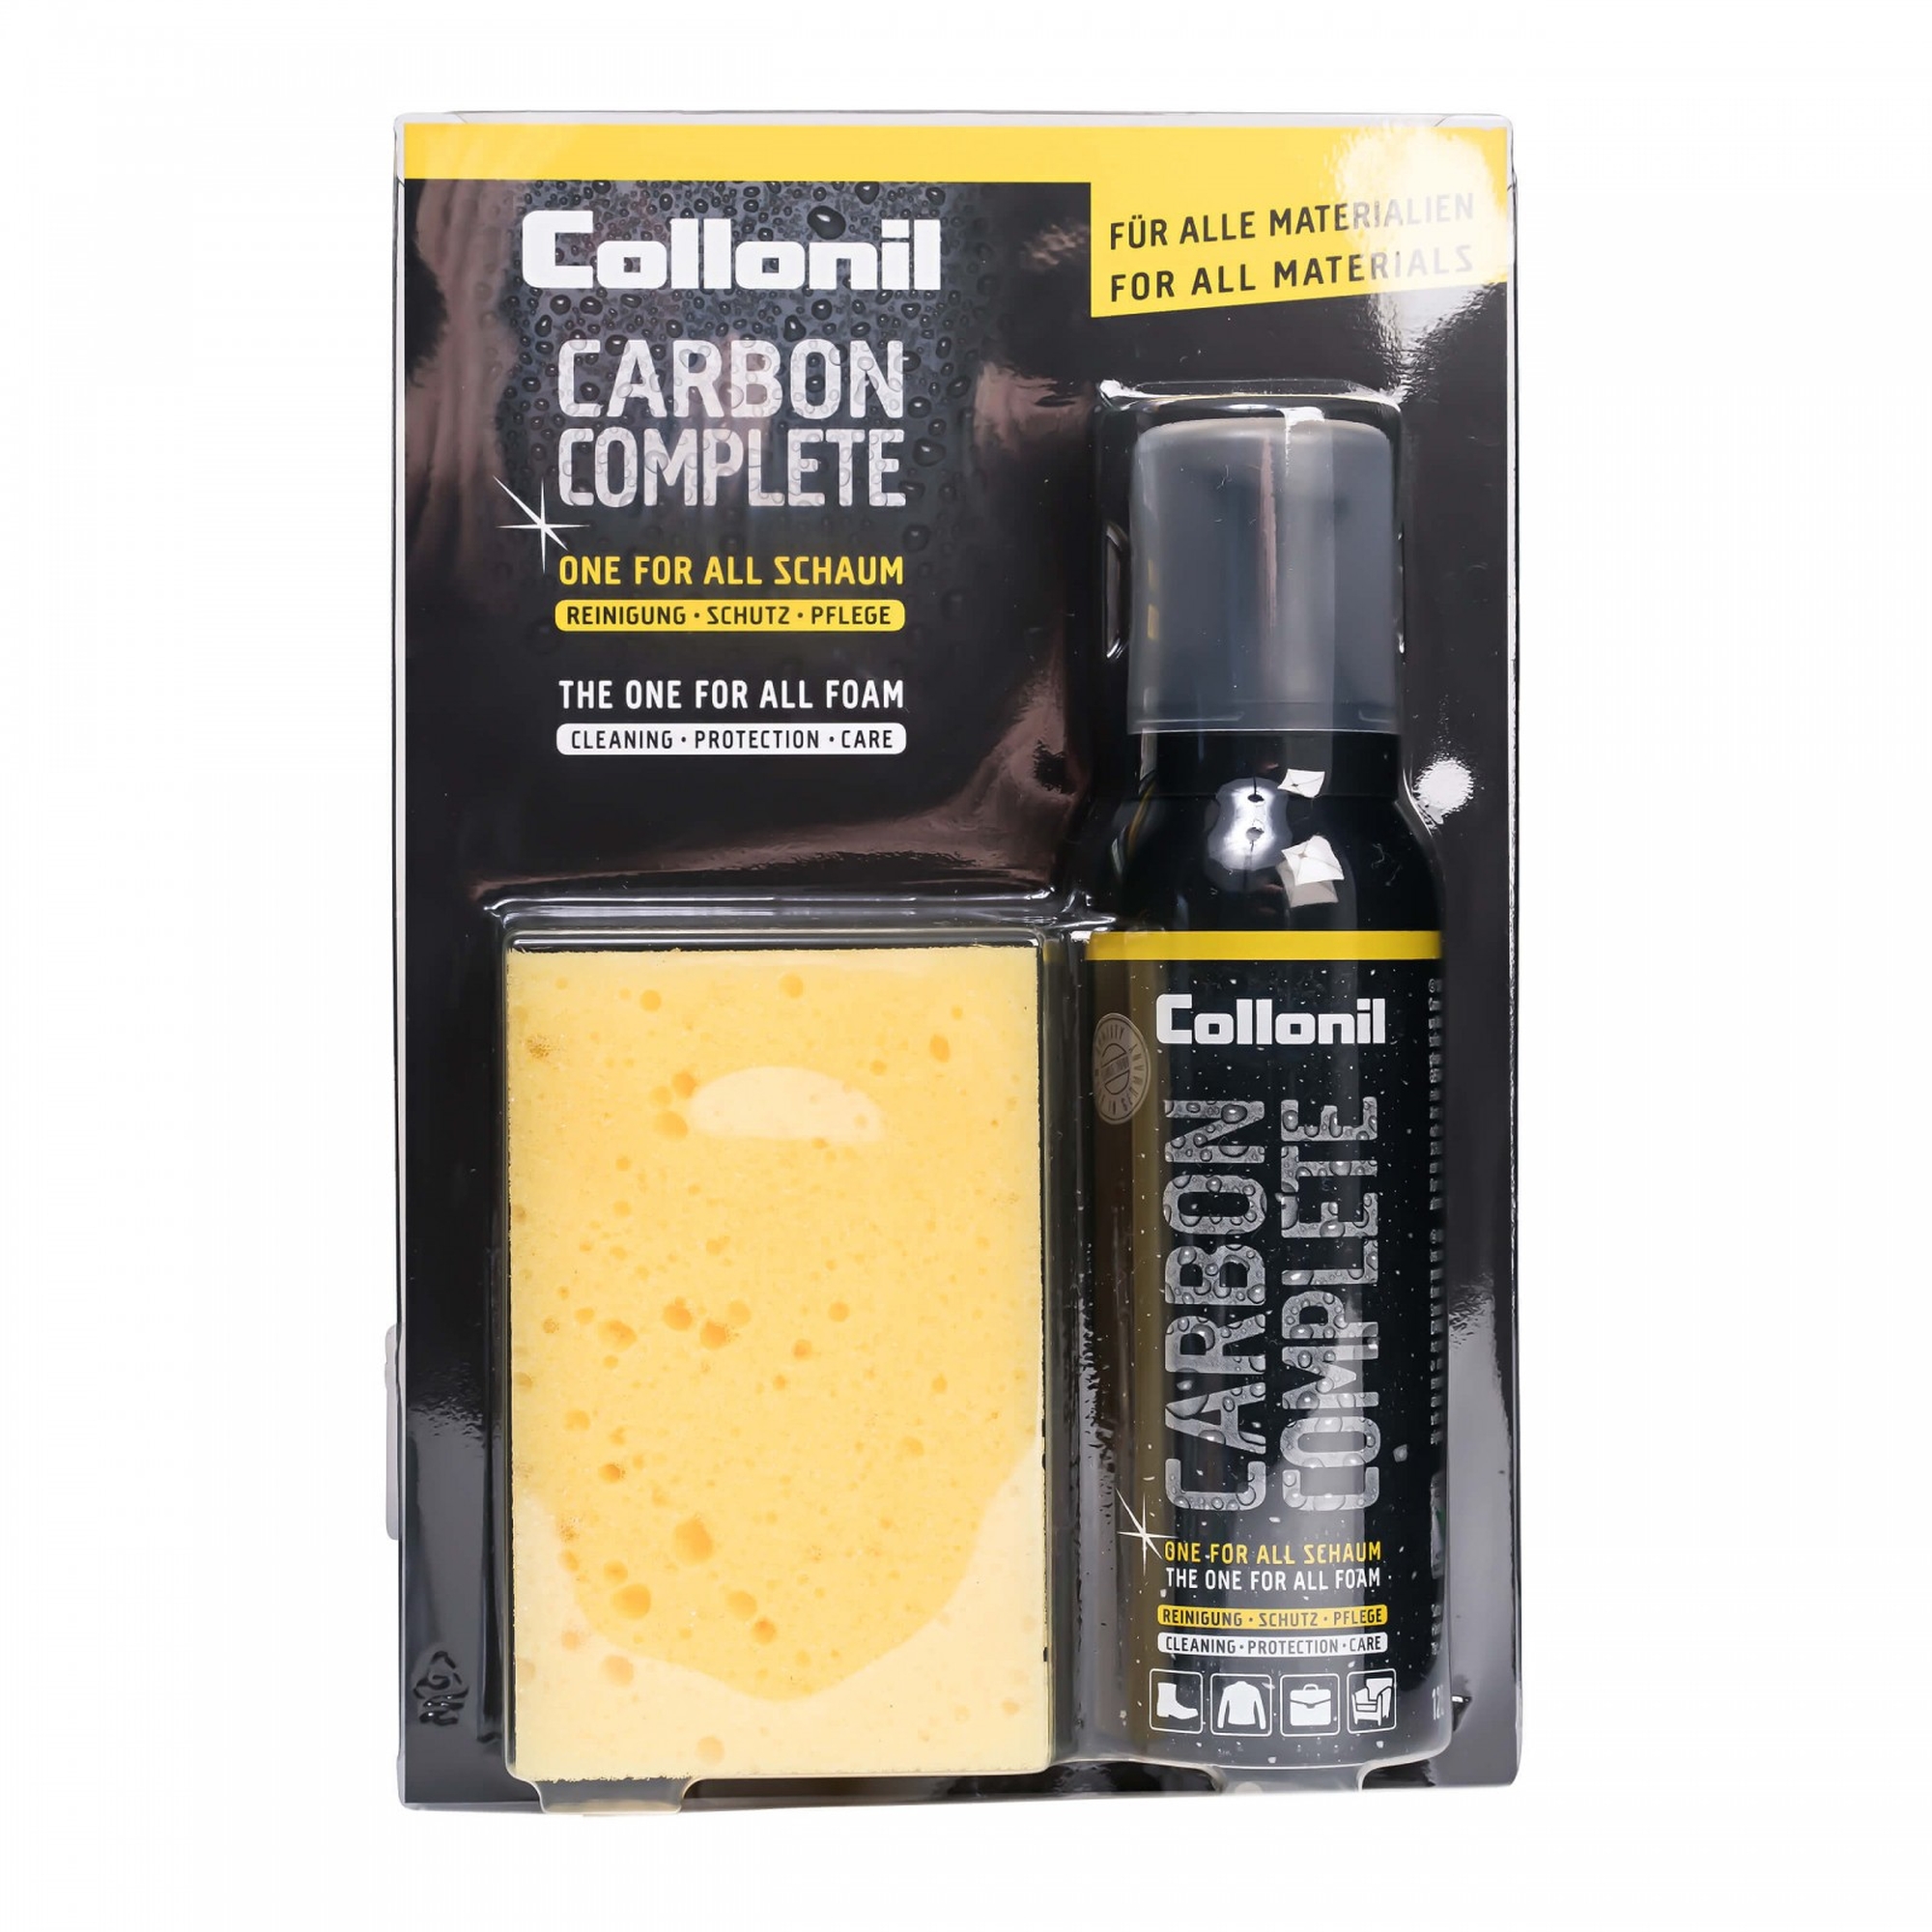 Collonil Carbon Complete 14300100 One for all foam